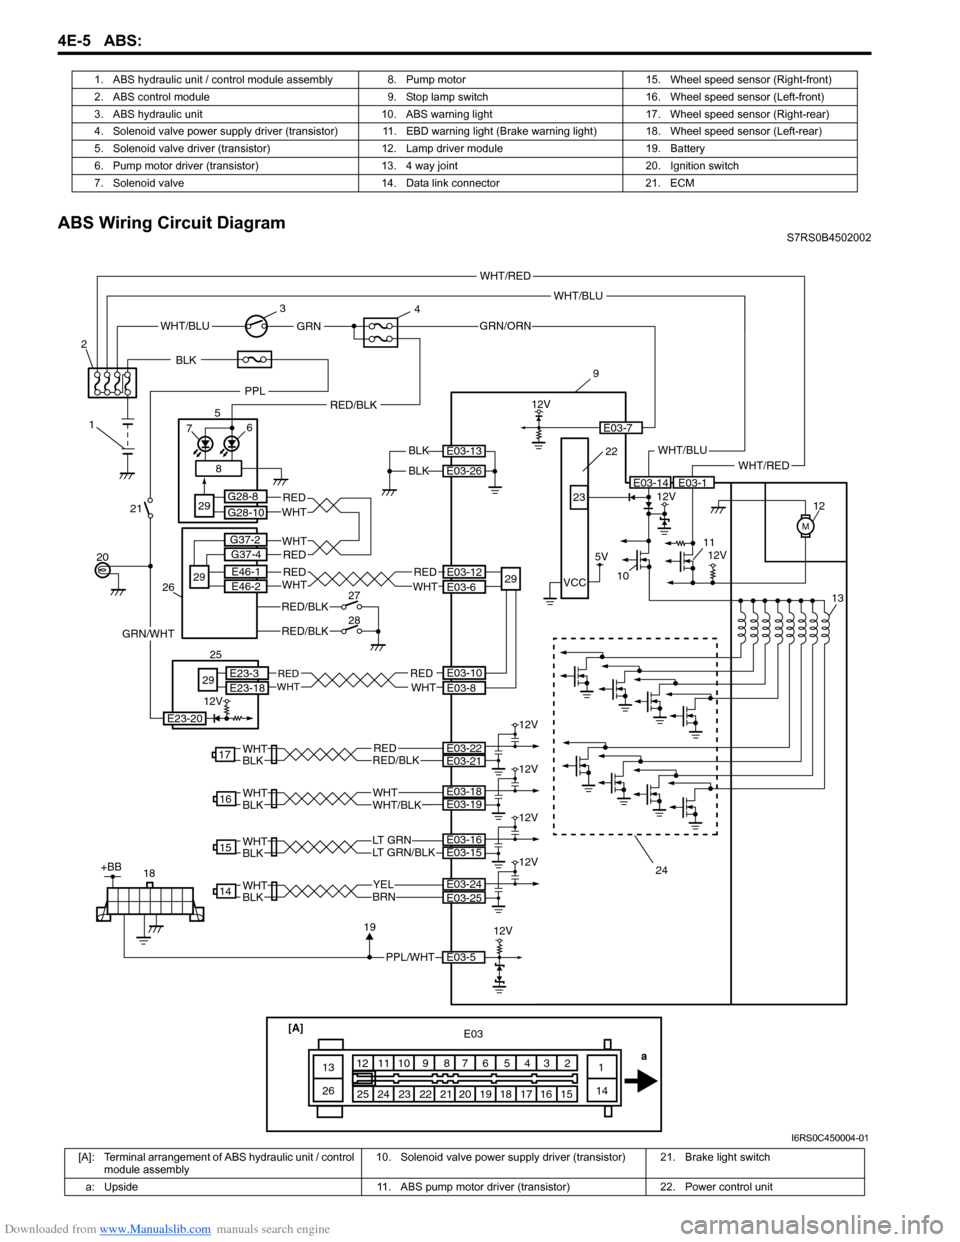 SUZUKI SWIFT 2007 2.G Service Workshop Manual Downloaded from www.Manualslib.com manuals search engine 4E-5 ABS: 
ABS Wiring Circuit DiagramS7RS0B4502002
1. ABS hydraulic unit / control module assembly 8.
Pump motor 15. Wheel speed sensor (Right-